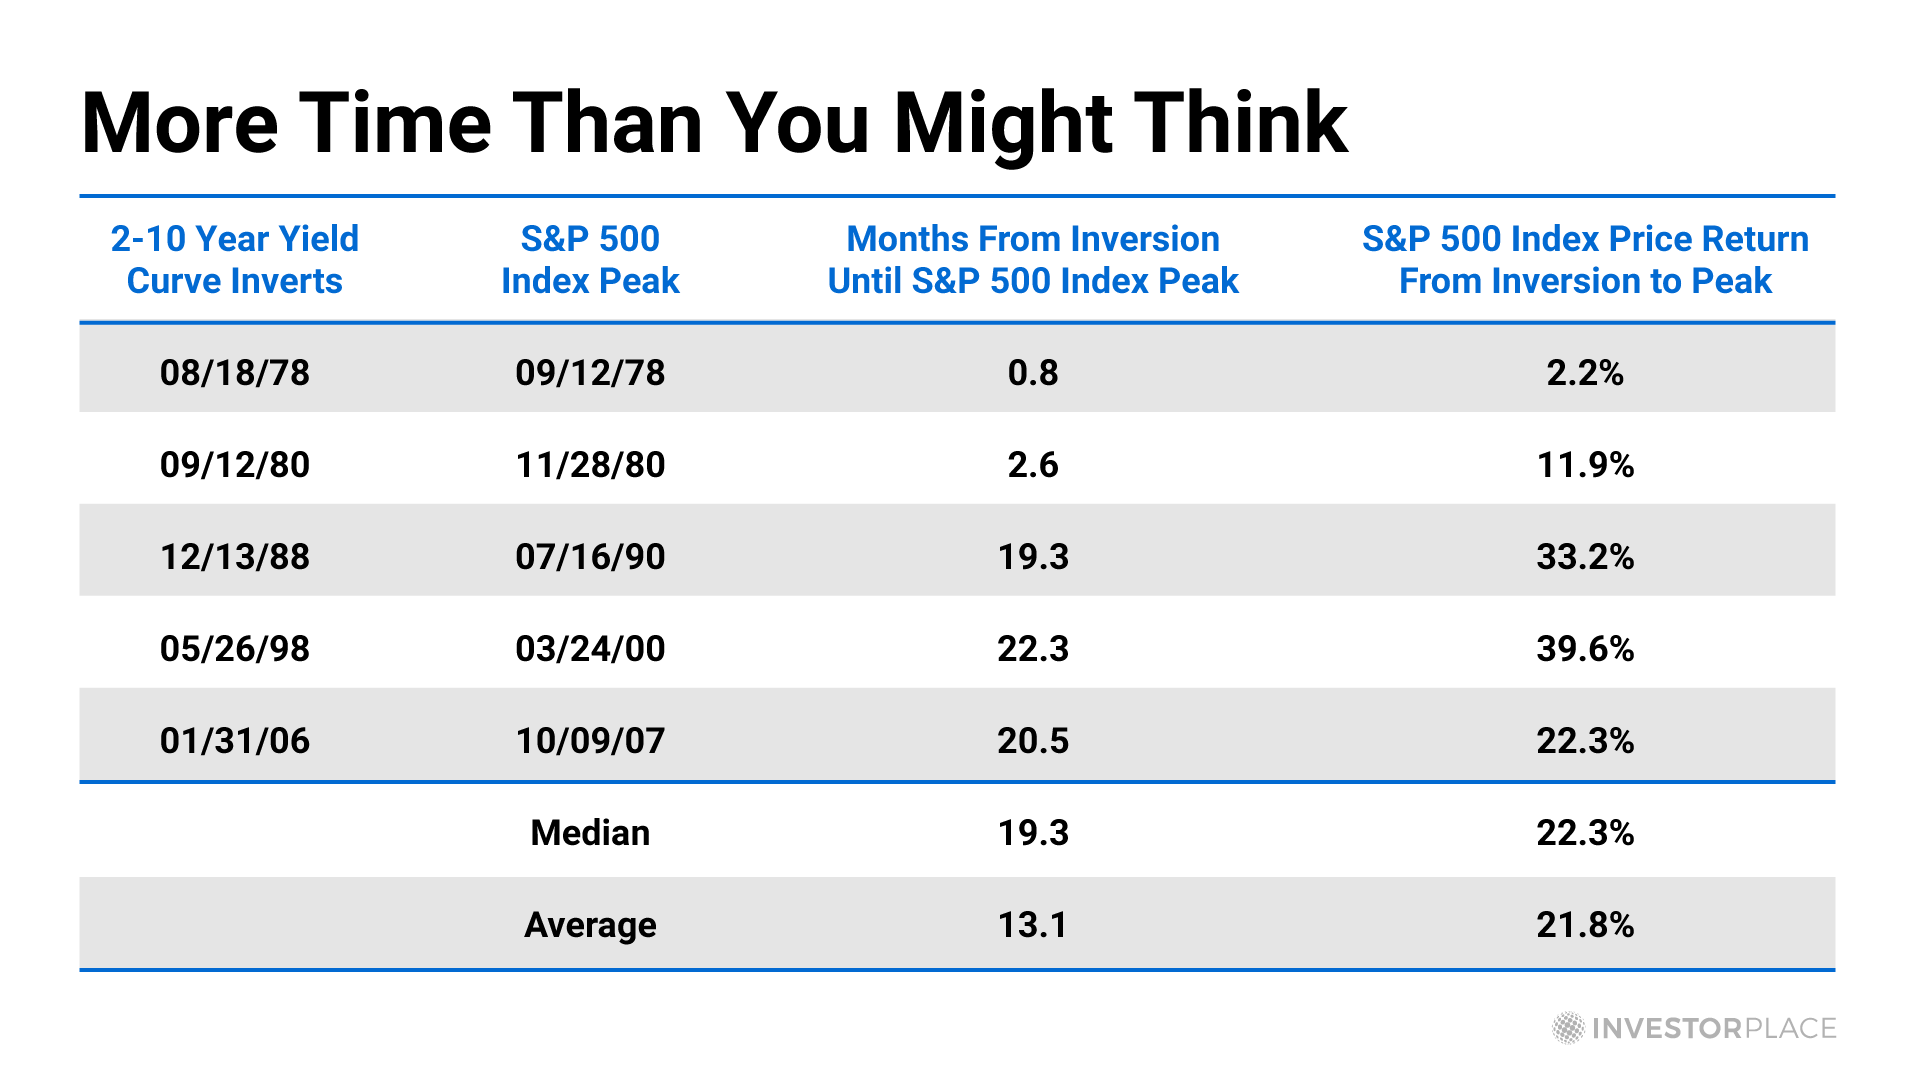 A chart showing the time difference between when the yield curve inverts and when the S&P 500 hits a peak.